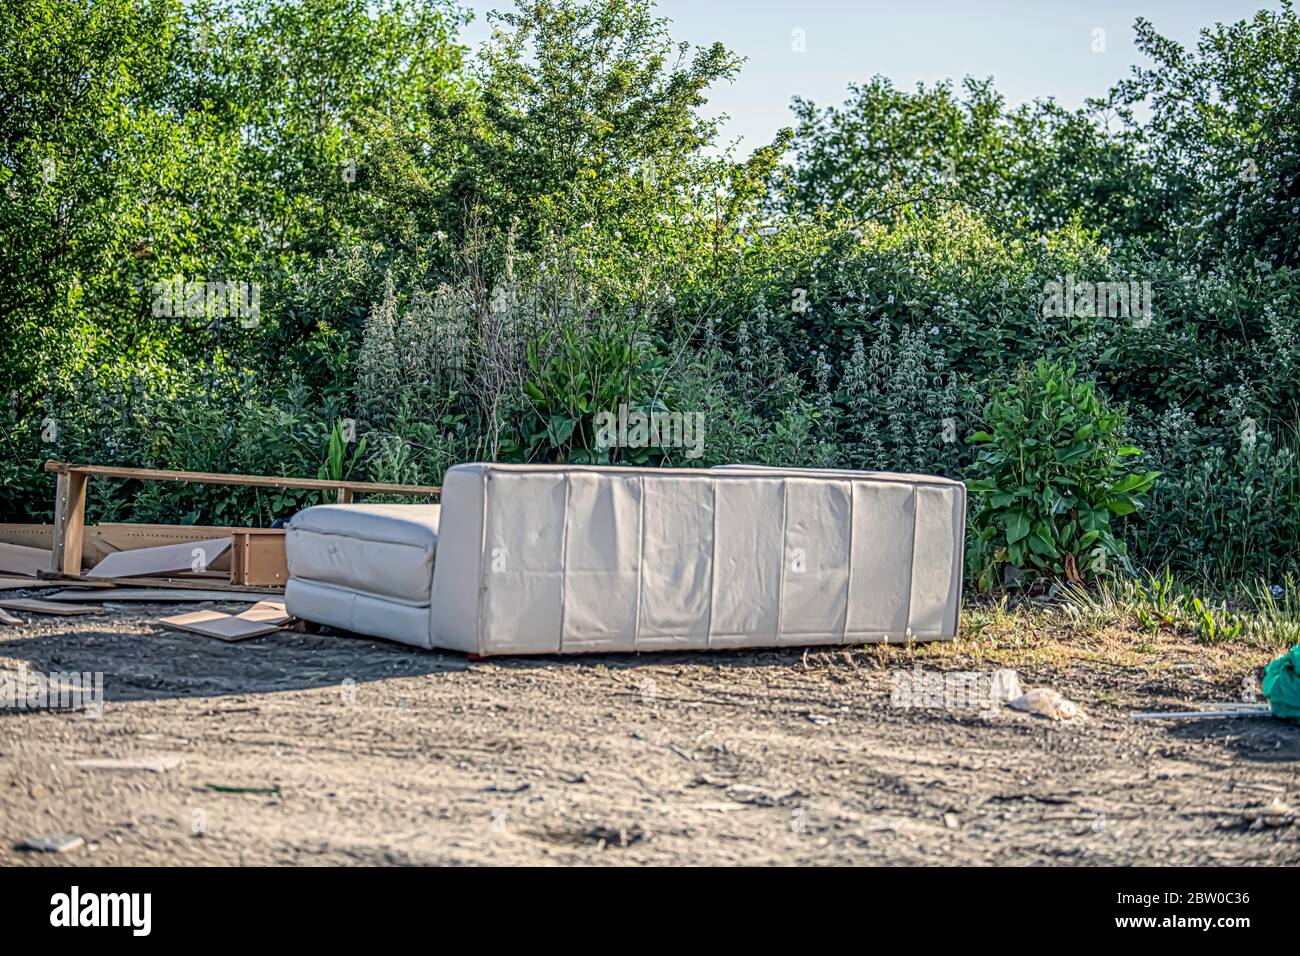 Illegal Fly tipping rubbish dumped in country side May 2020 Stock Photo